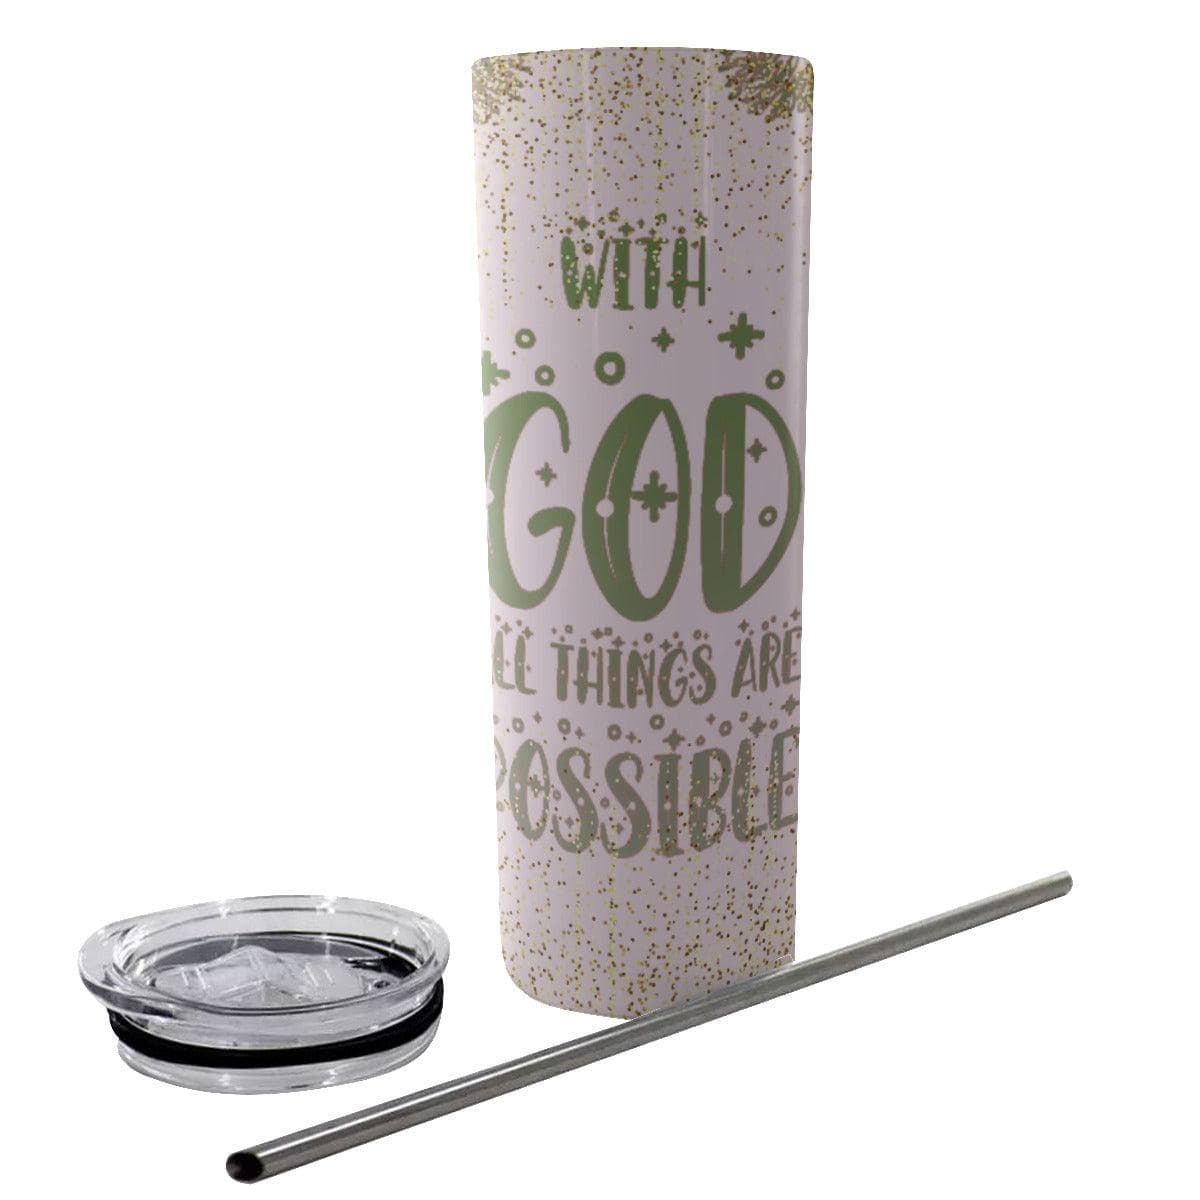 All things Possible Tumbler With God Stainless Steel Straw Tumbler 20oz - Thumbedtreats